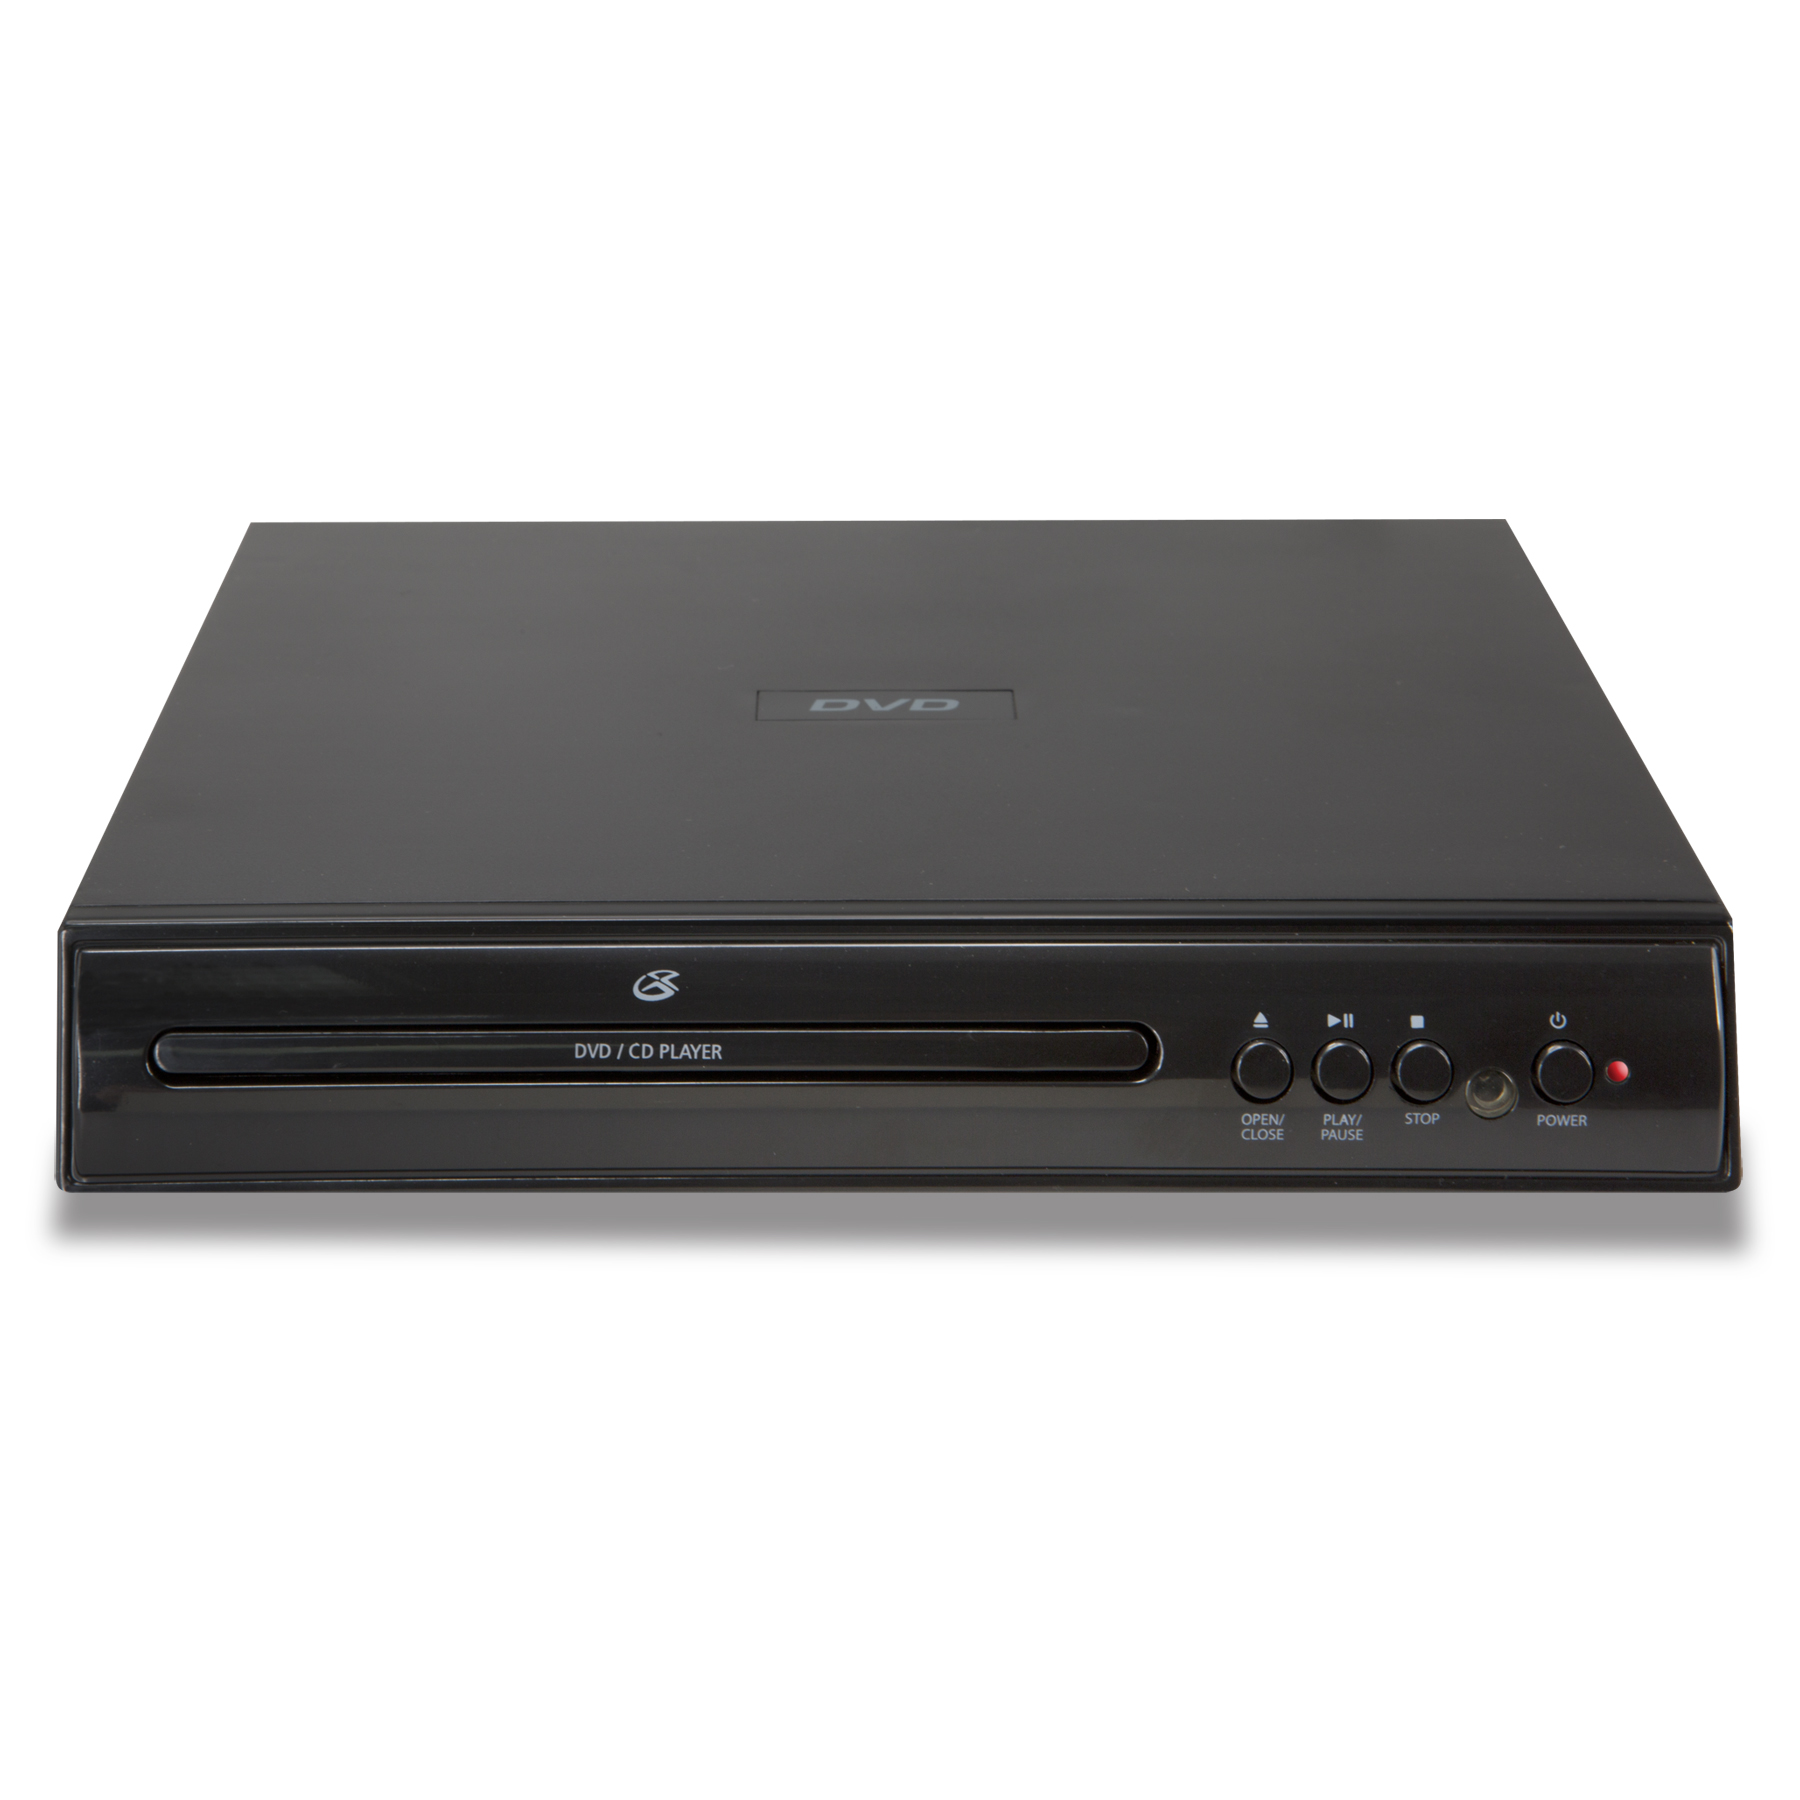 GPX D200B Progressive Scan DVD Player with Remote, Black - image 1 of 5